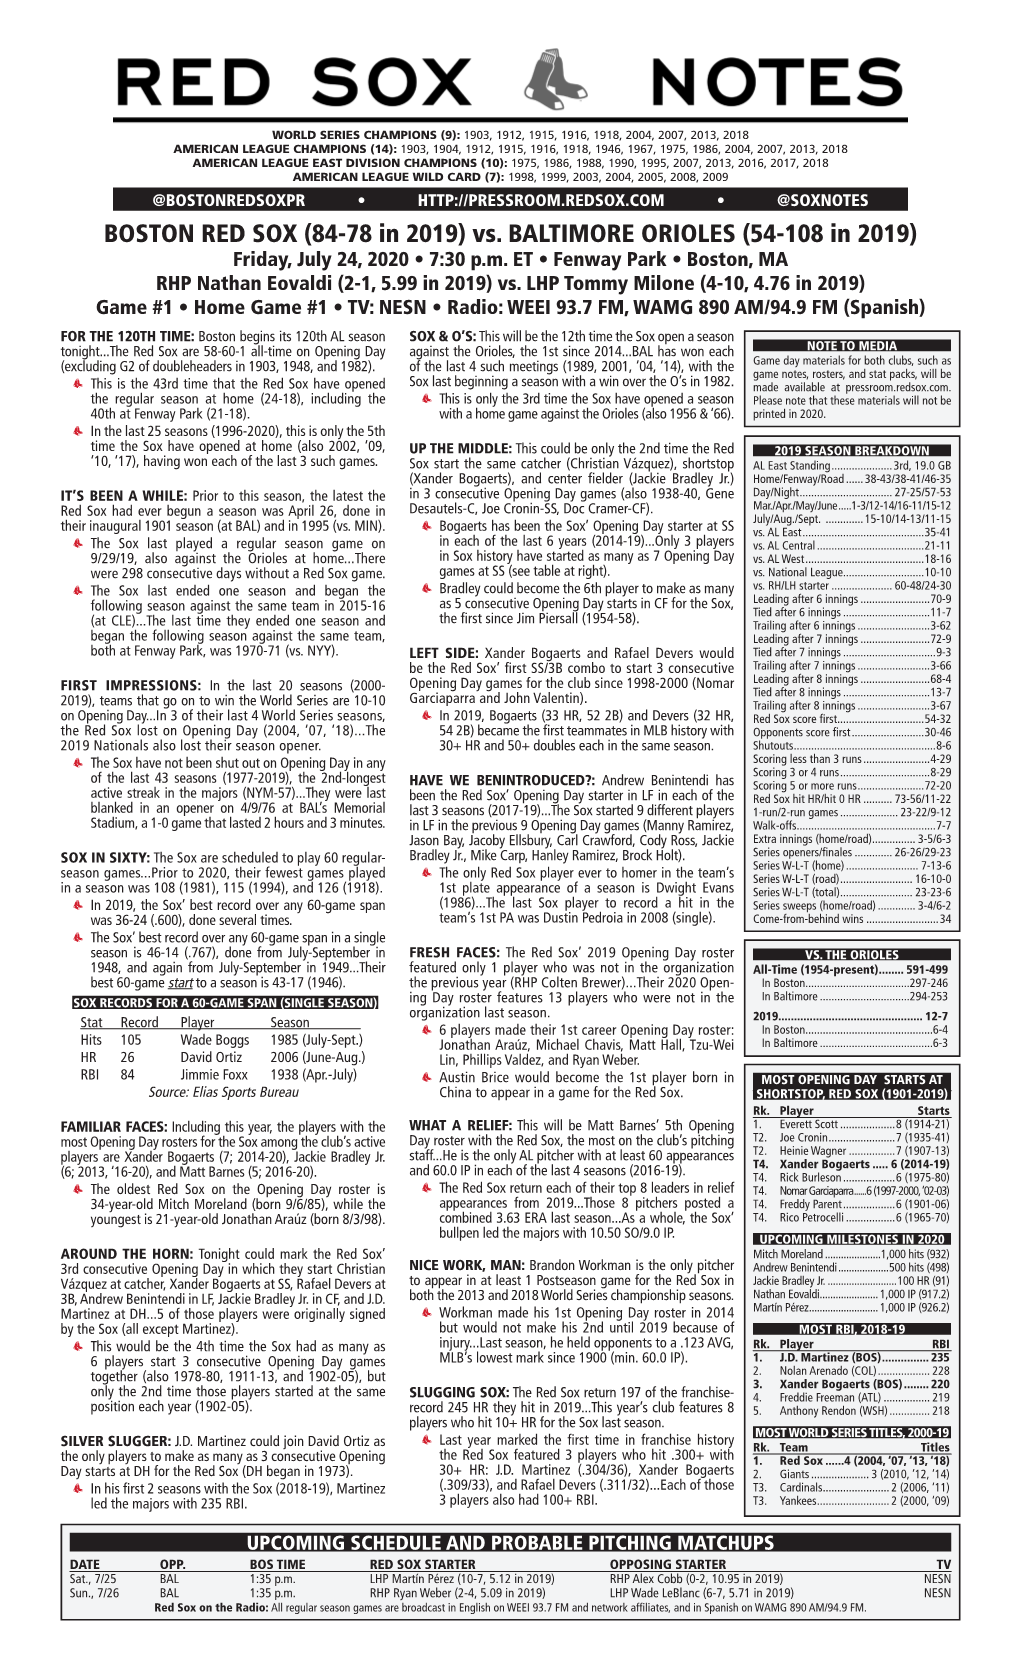 Red Sox Game Notes TONIGHT’S STARTING PITCHER Page 2